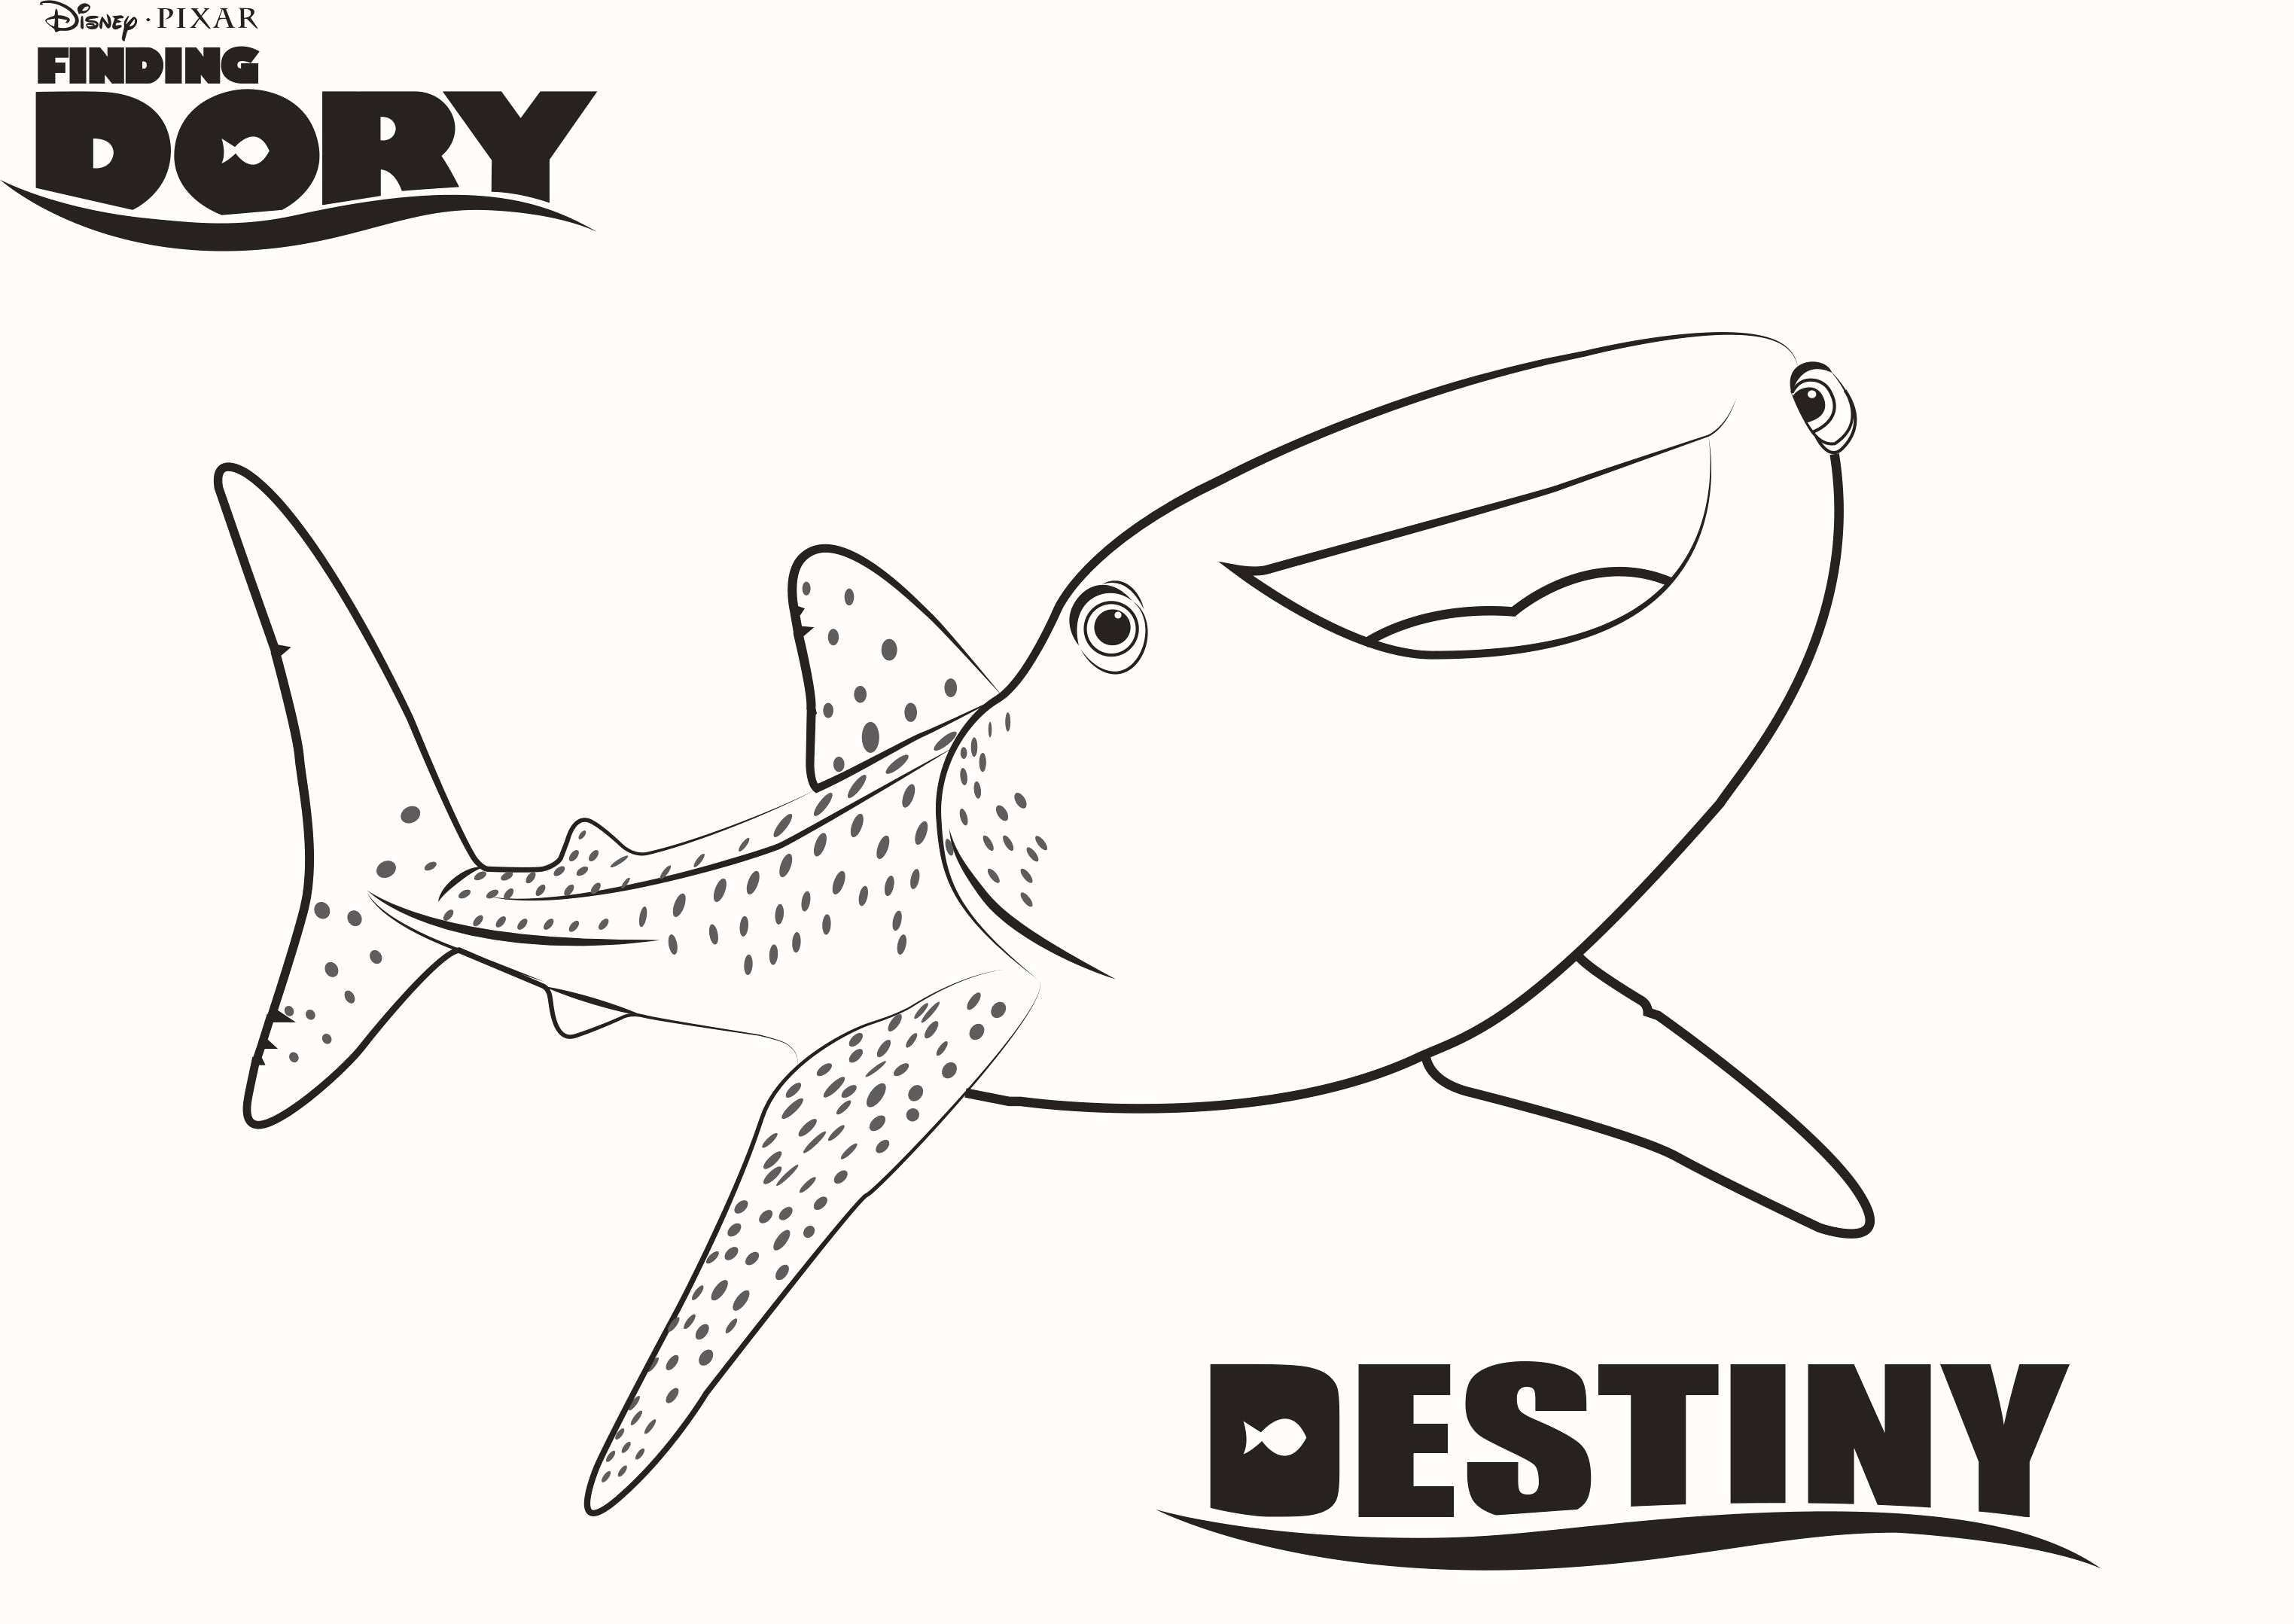 Finding Nemo Characters Coloring Pages Finding Nemo Coloring Pages Best Of Disney Pixar Coloring Pages